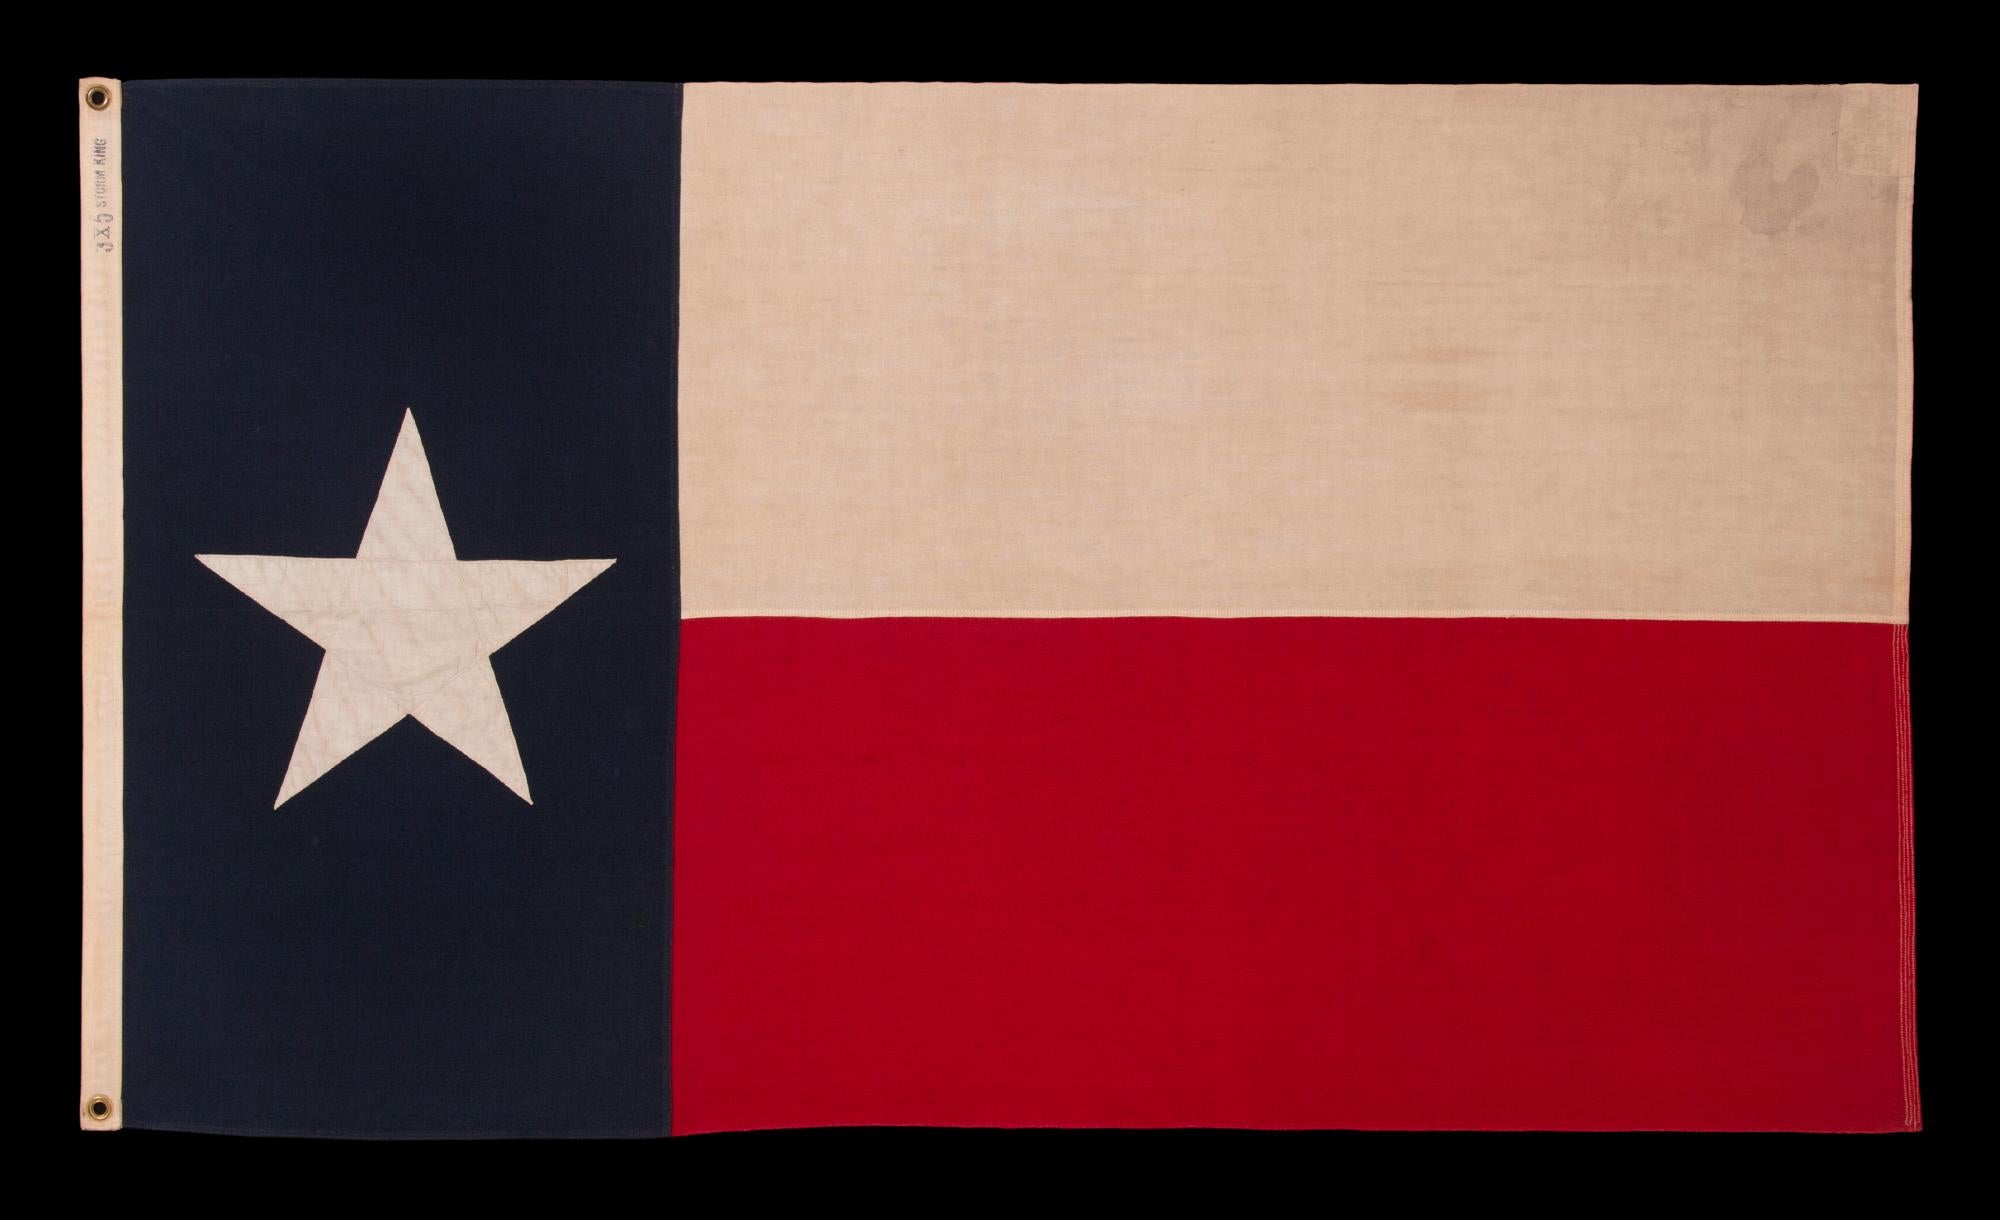 Texas state flag, made sometime in the period between the latter 1940’s and the 1950’s. The single star is made of cotton and is double-appliquéd (applied to both sides) with a zigzag machine stitch. The vertical bar and the two horizontal bars are